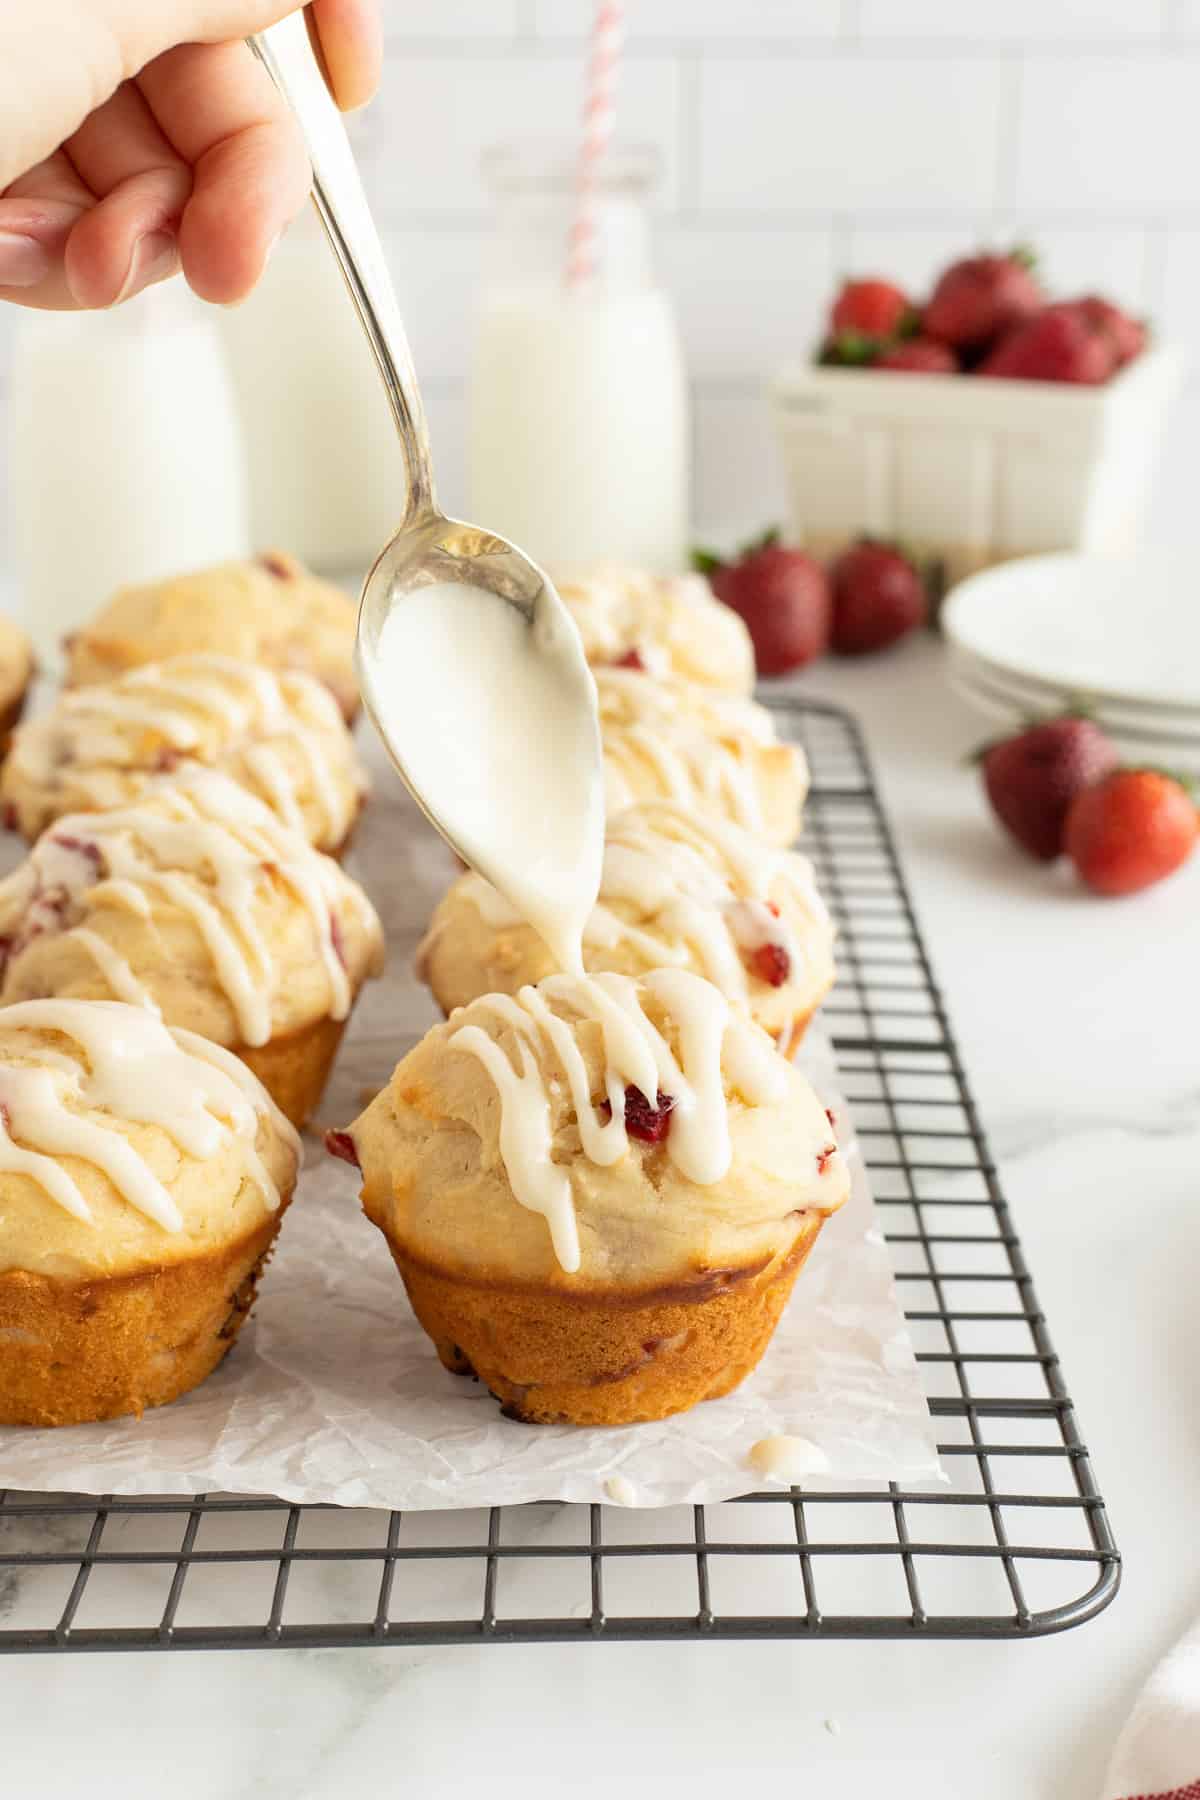 A spoon drizzling icing over a strawberry muffin on a wire rack.